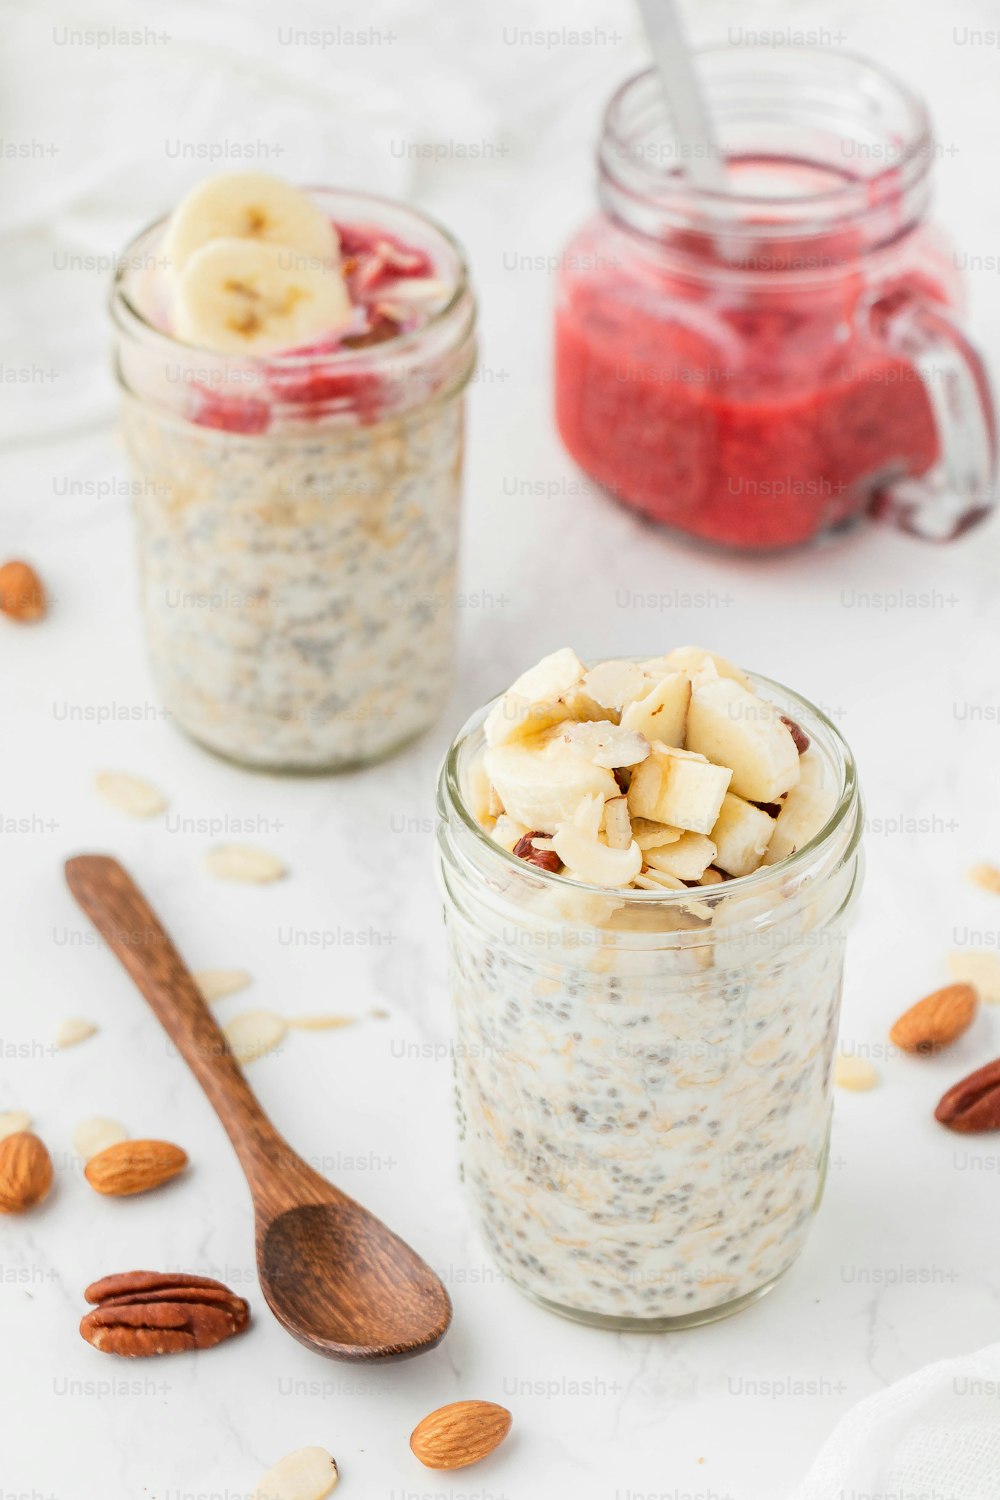 two jars filled with oatmeal and sliced bananas